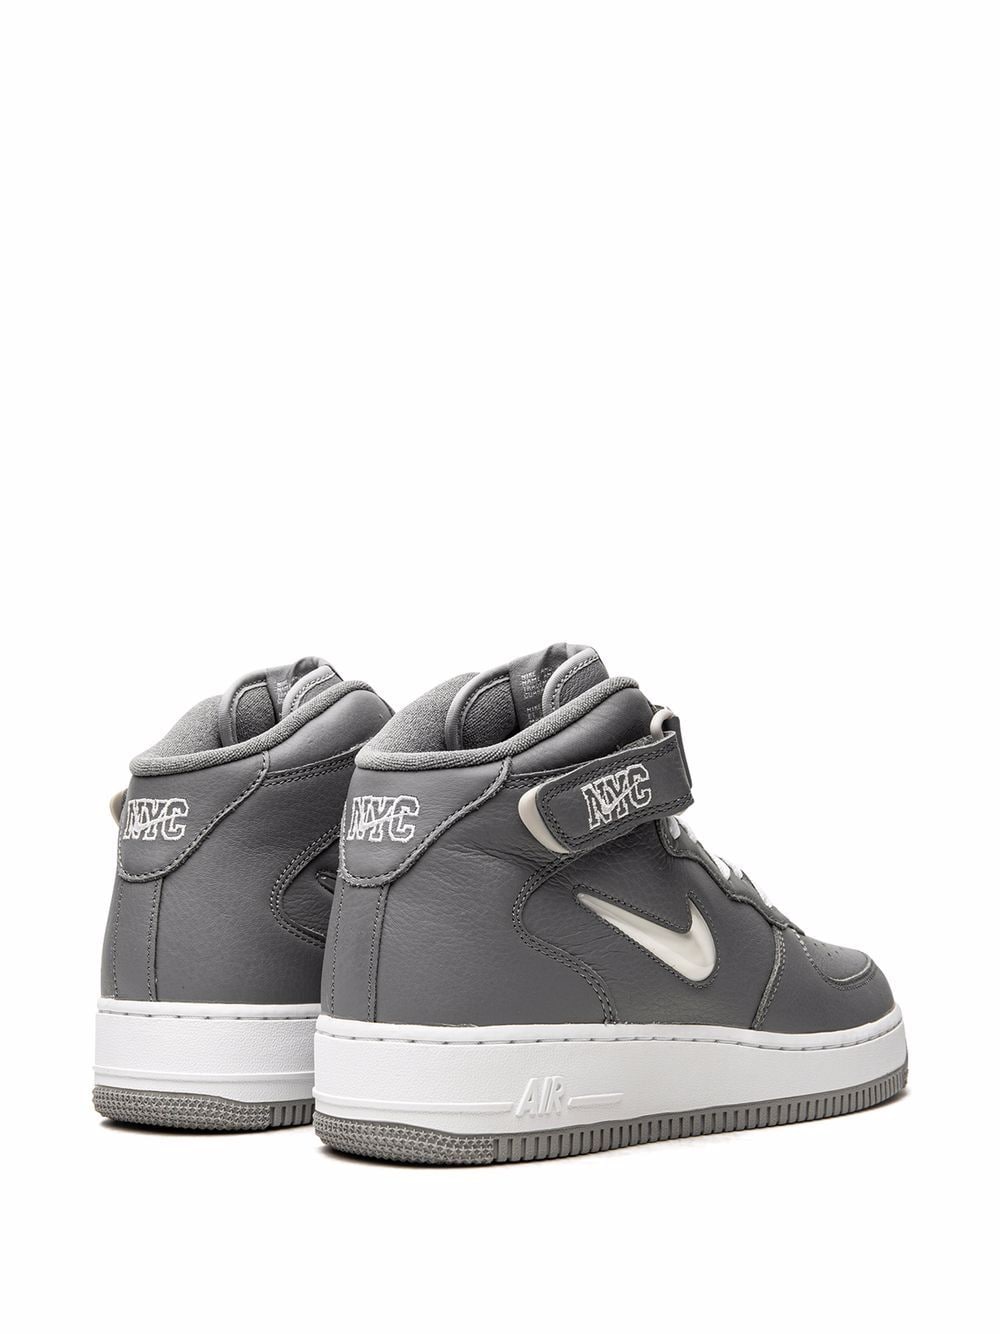 Air Force 1 Mid QS Jewel NYC Cool Grey sneakers